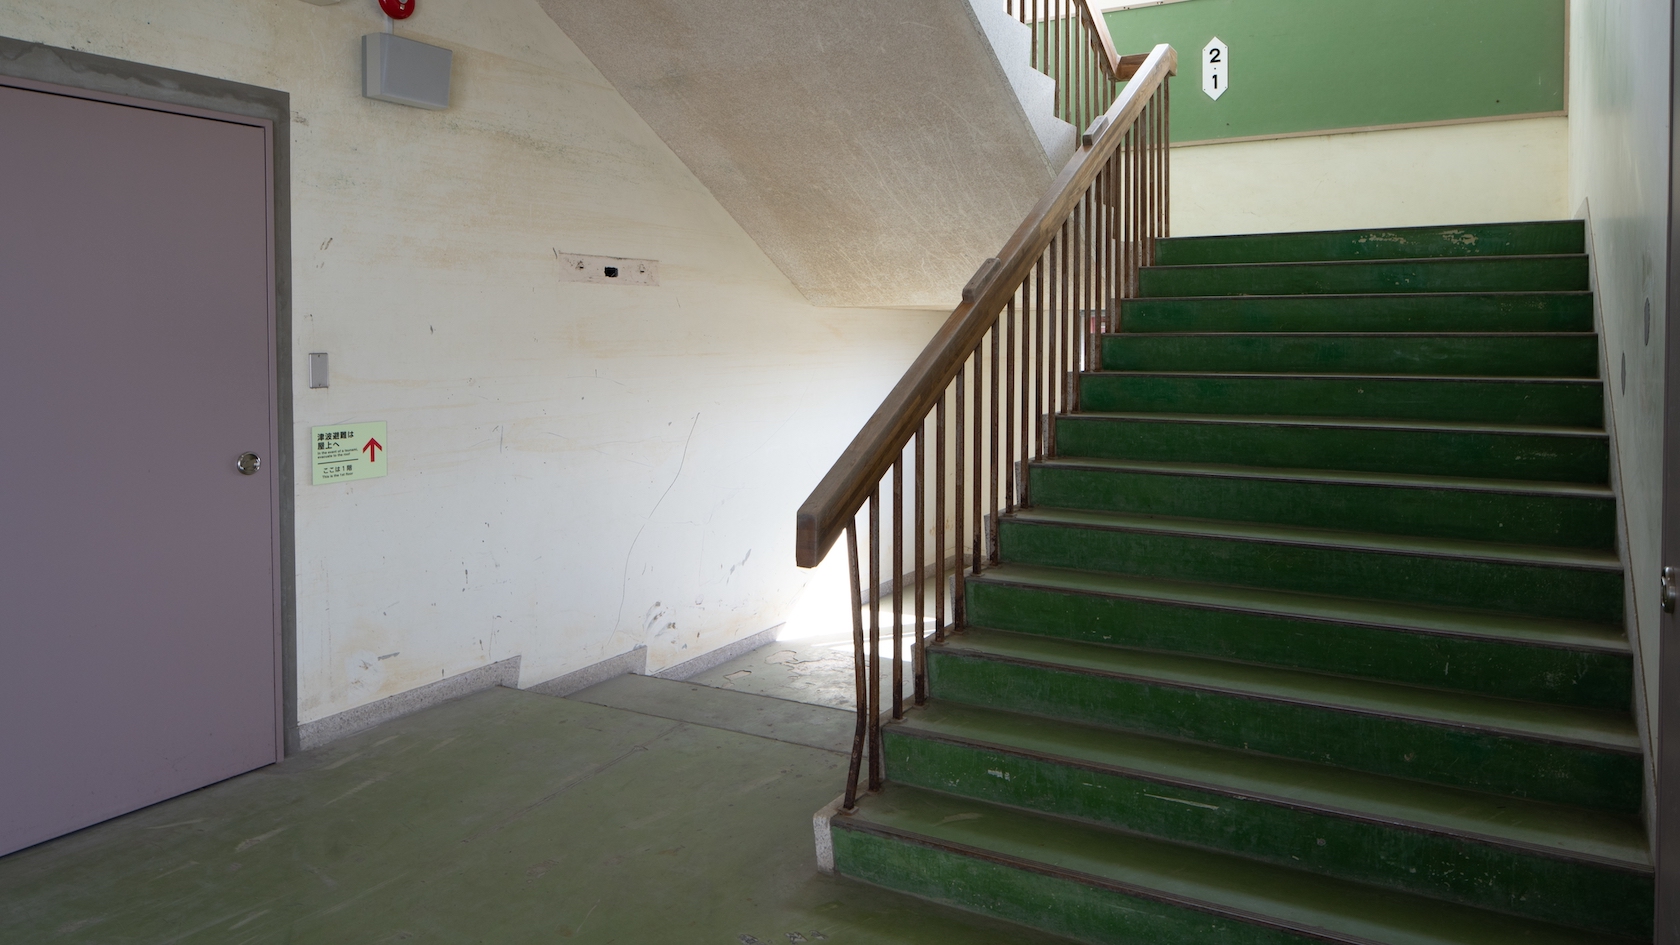 Adobe Stock 226486693. A stairwell in a Japanese school.